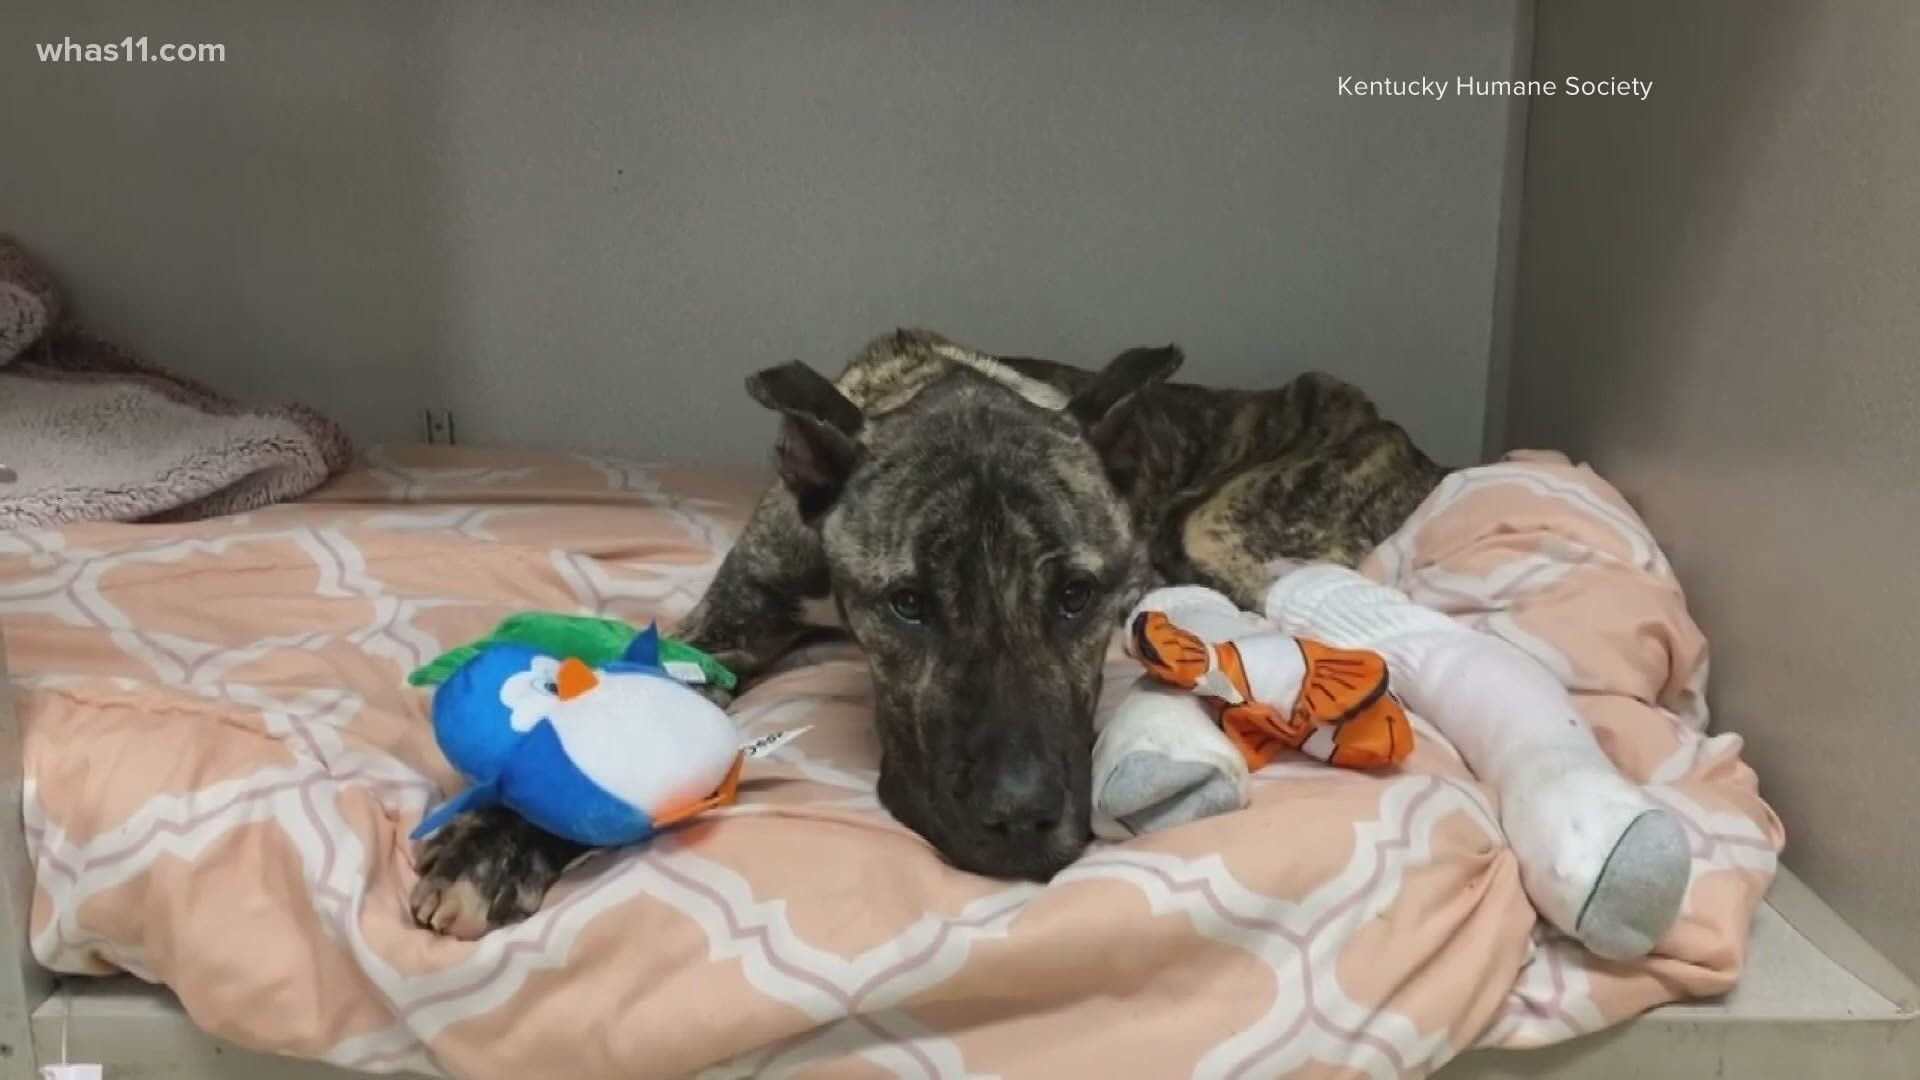 Ethan the Dog was left emaciated in a cold parking lot. His recovery was dramatic, and months later, he's facing a neurological issues.